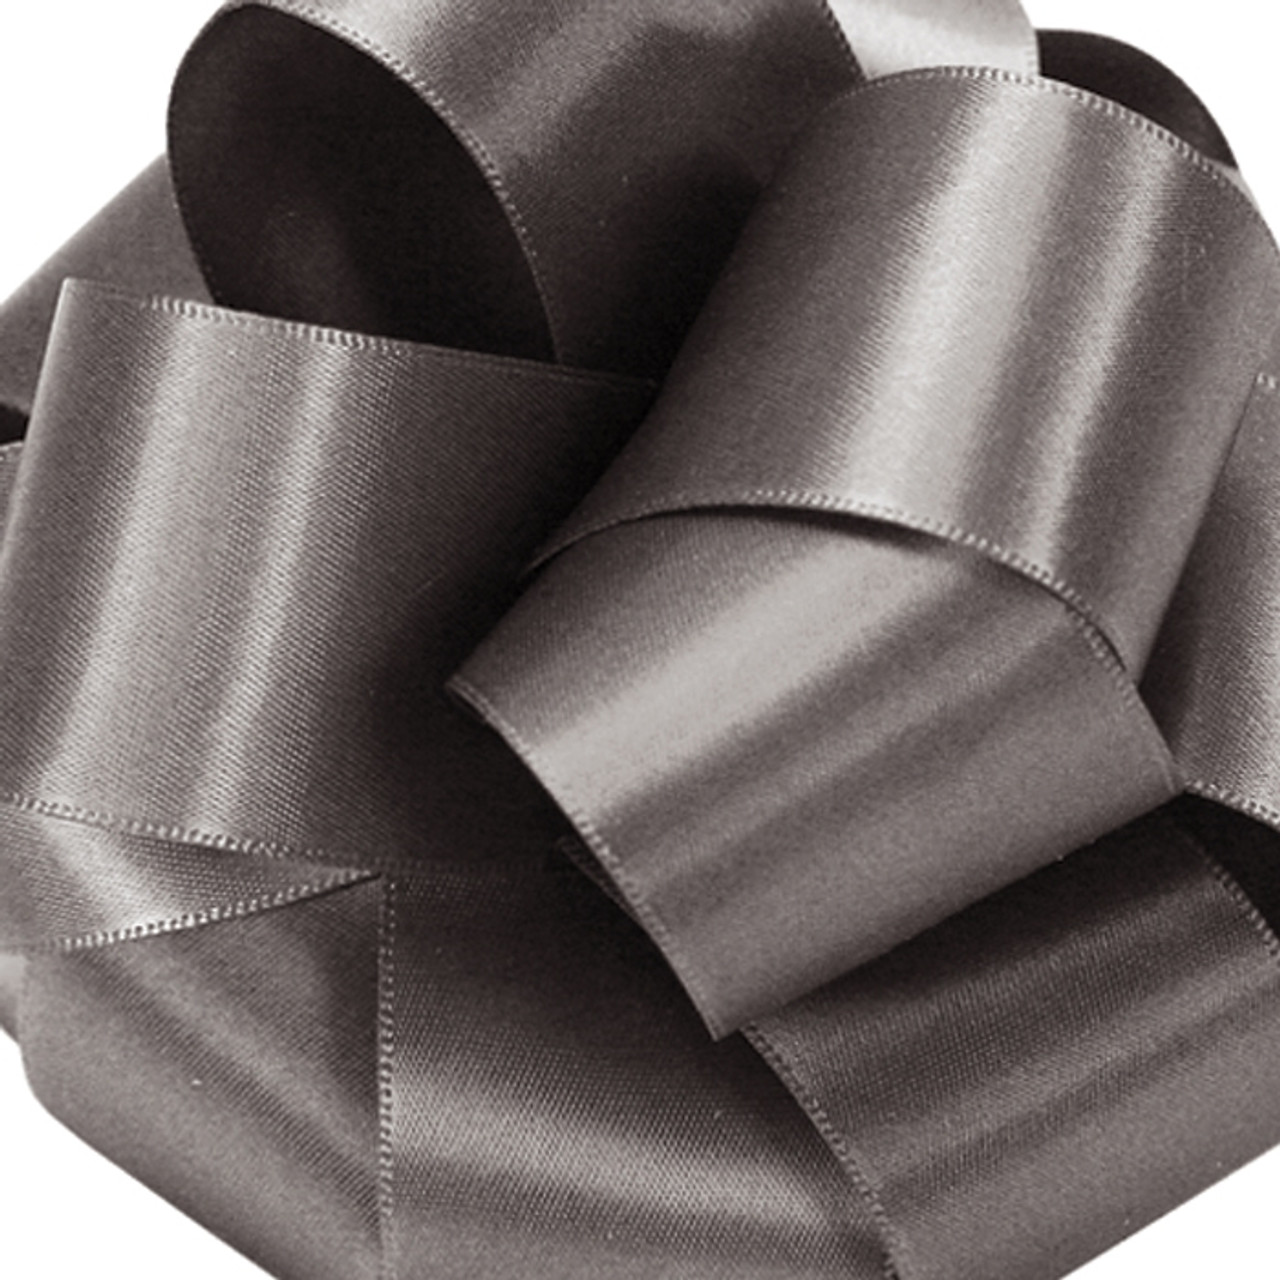 Offray Double Face Satin Ribbon 1/4 in. x 100 yd. Black (100 yards)